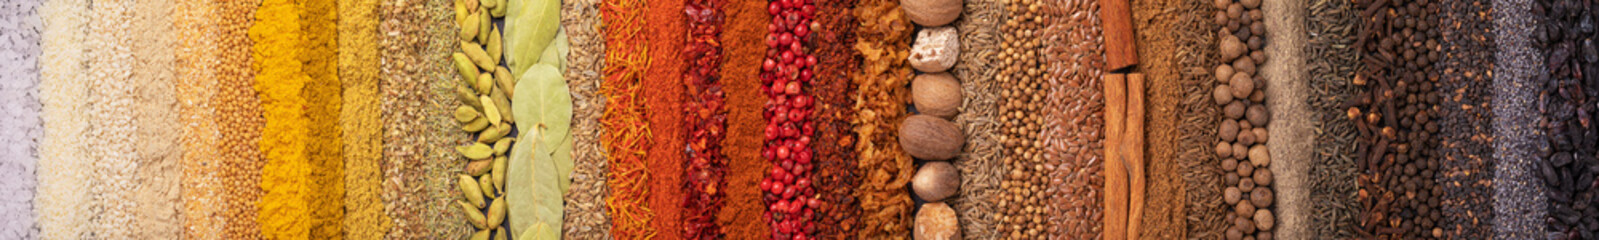 Seasoning, spice and herbs background. Panoramiс background with various condiments for food, top view